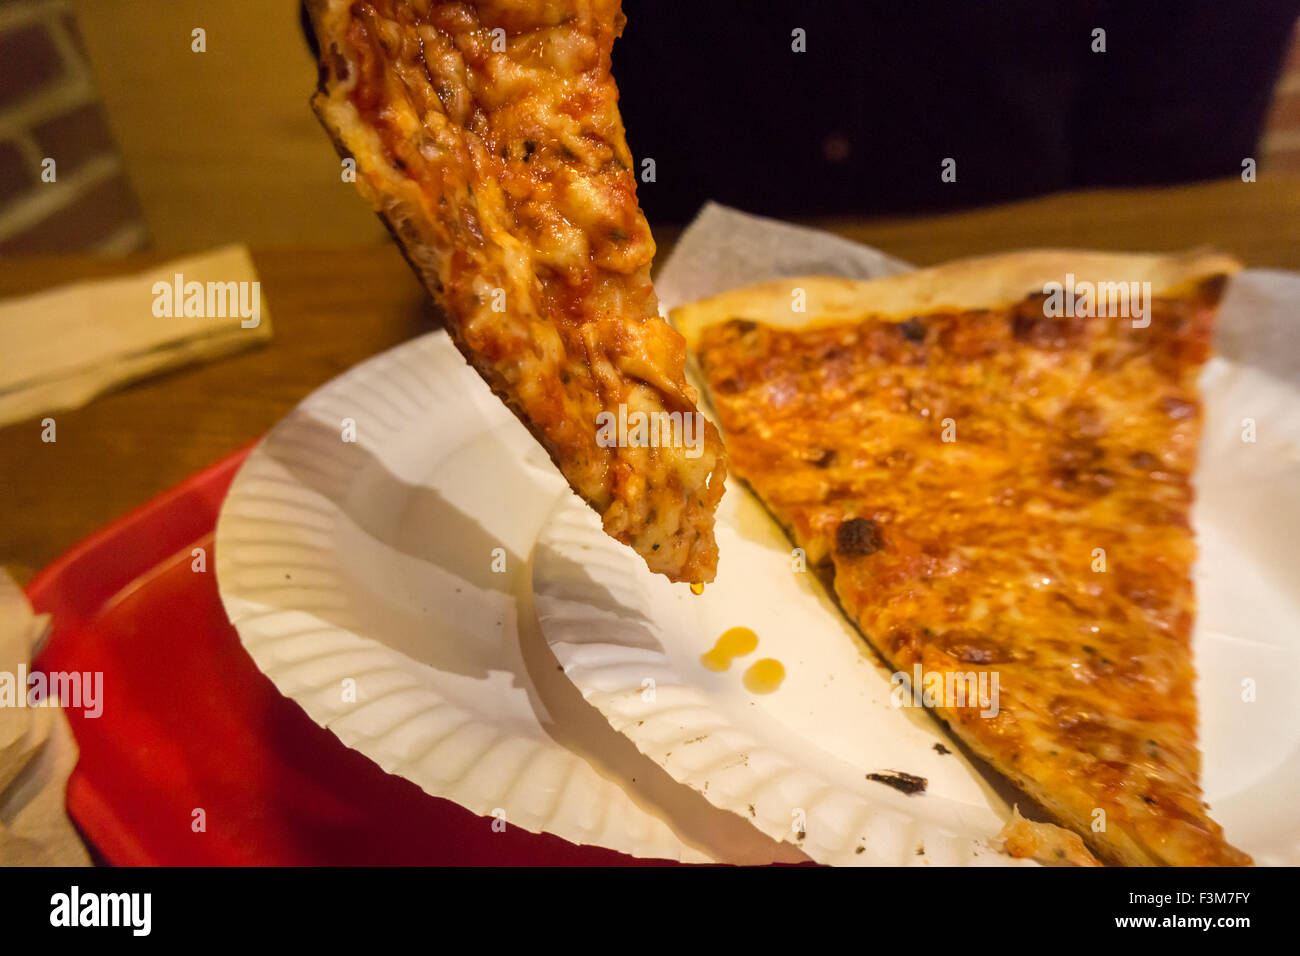 A hungry consumer drains her slice of pizza to remove the excess grease in a pizzeria in New York on Friday, October 2, 2015. A recent study reveals that degreasing your slice removes up to 76 calories and 4 1/2 grams of fat, or up to two pounds on your waistline every year. The average American eats 23 pounds of pizza yearly. (© Richard B. Levine) Stock Photo